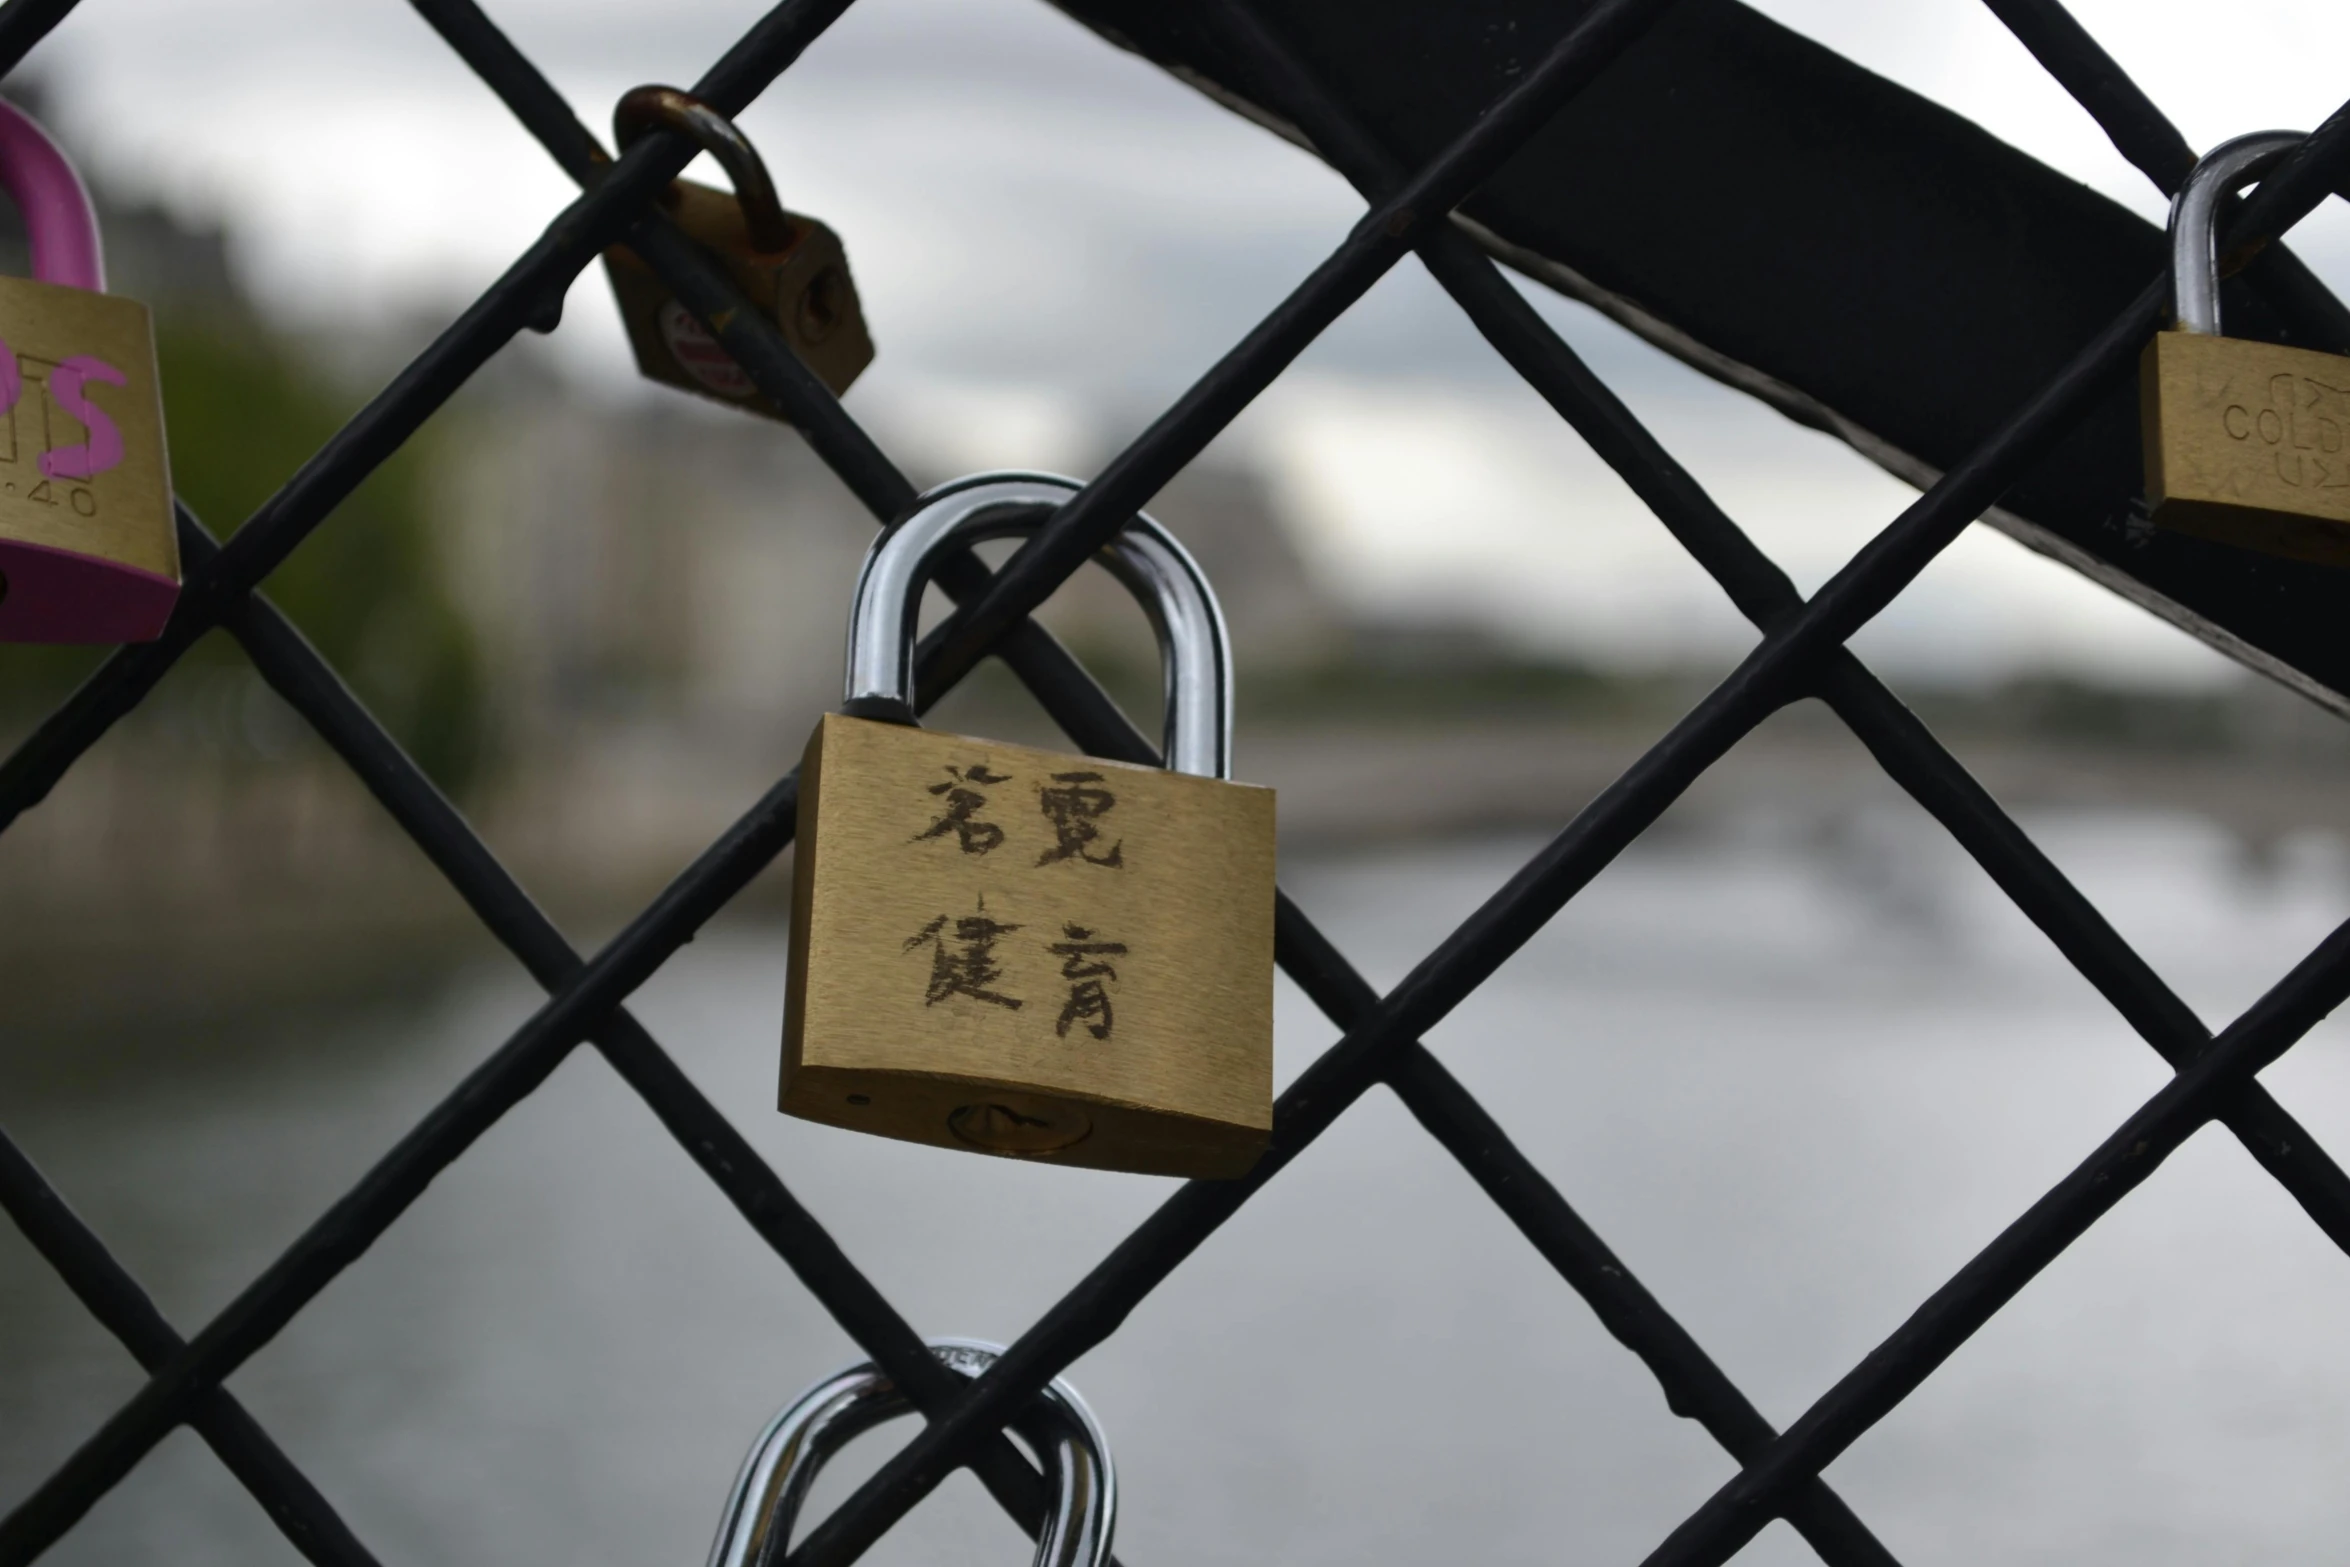 a number of padlocks attached to a fence, an album cover, unsplash, temporary art, golden chinese text, from louvre, 2 0 7 7, bridges